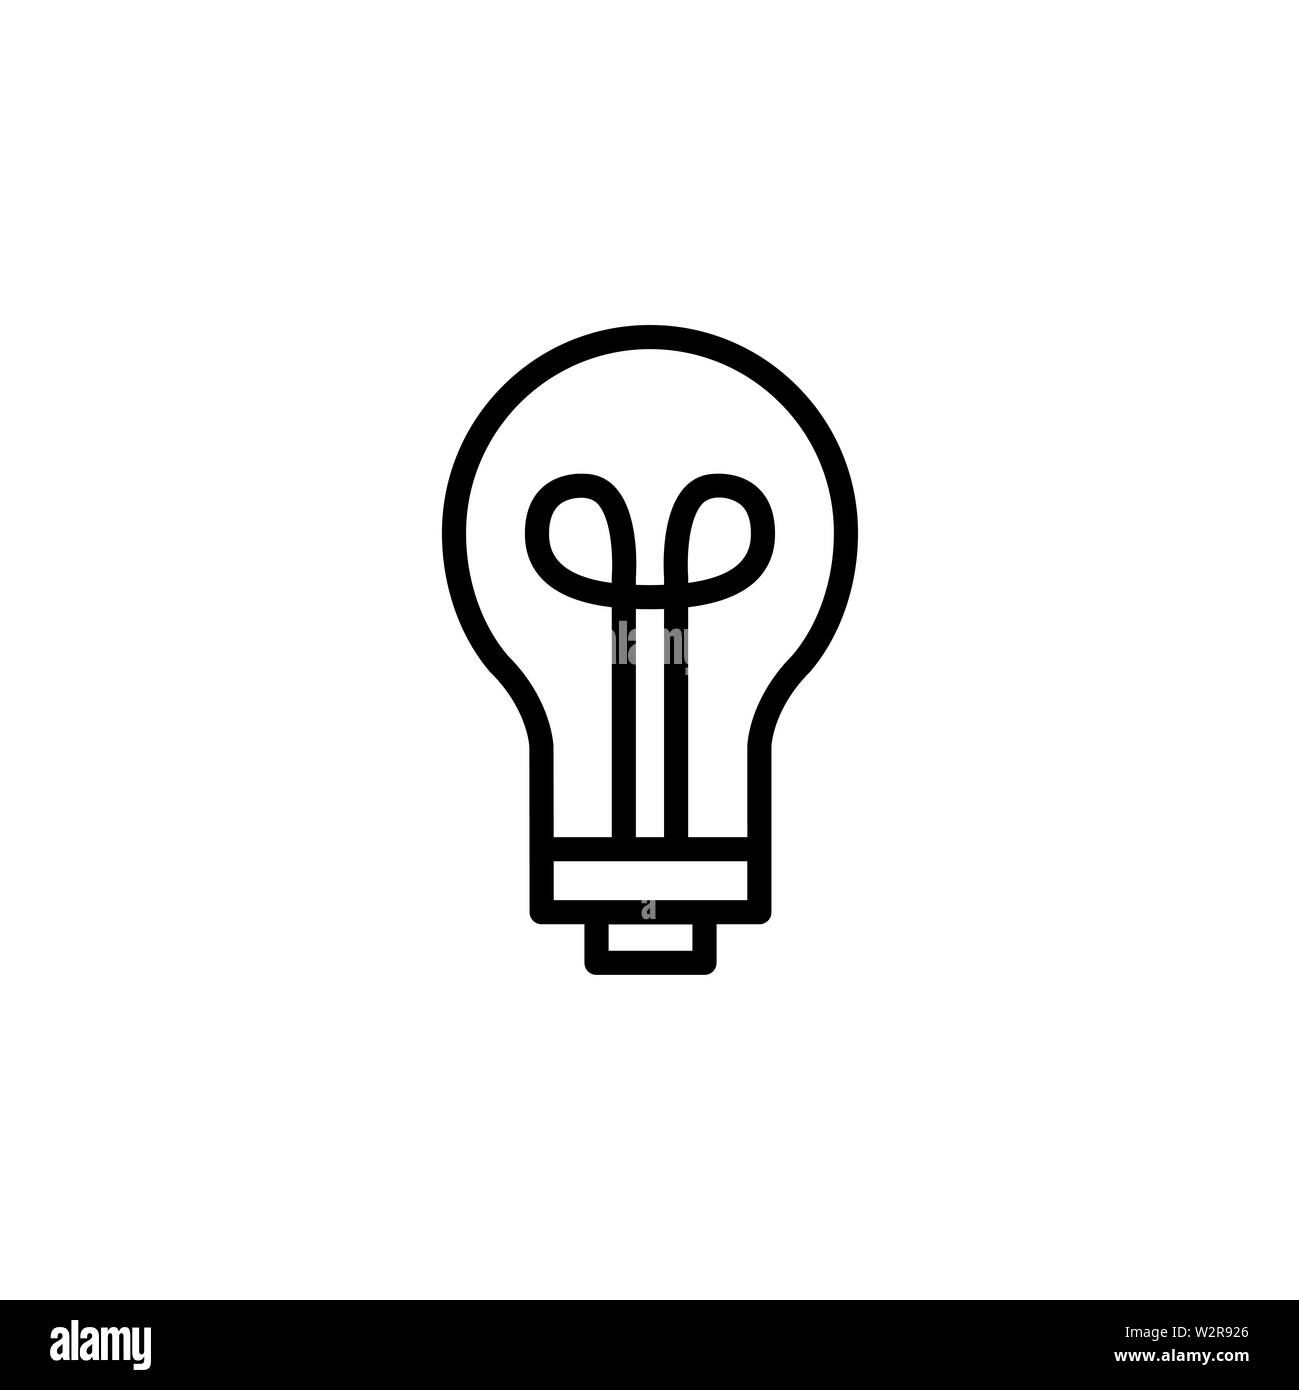 Light Bulb Line Icon In Flat Style Vector For App, UI, Websites. Black Icon Vector Illustration Stock Photo